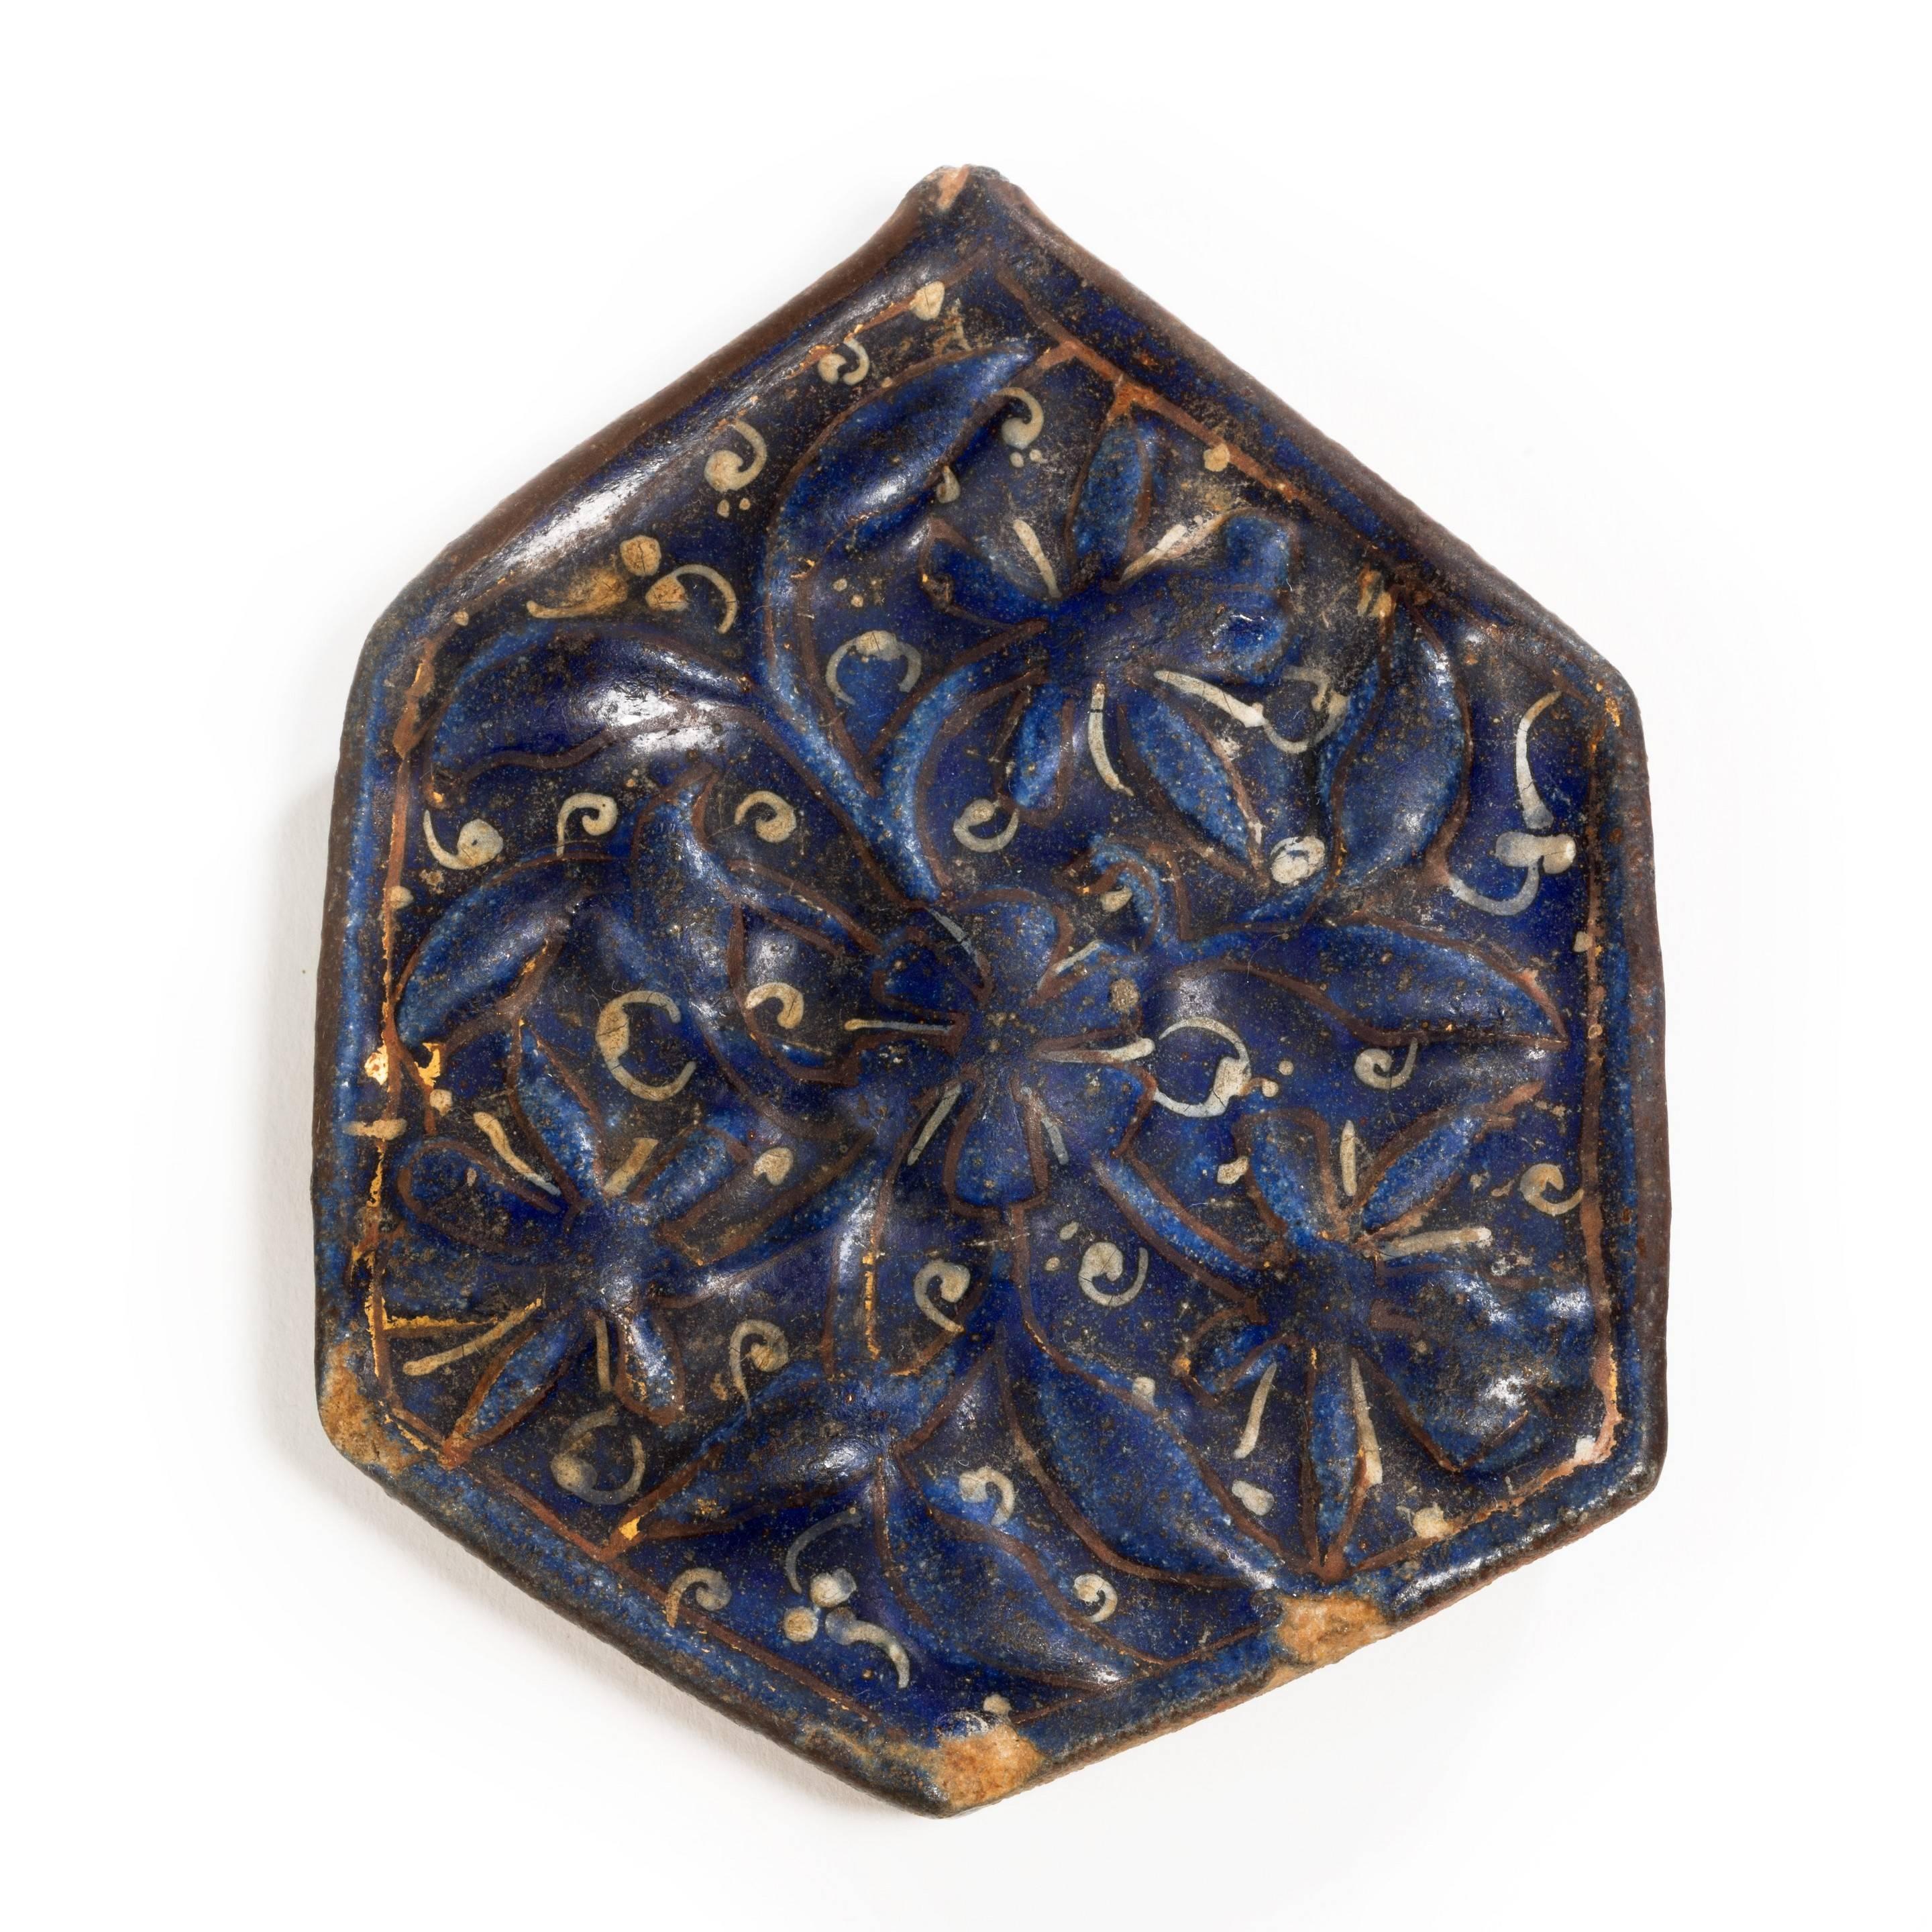 An Ilkhanid ladjvardina six-sided tile painted in underglaze blue with white scrolls and gilt highlights. Kashan (Iran), late 13th century.